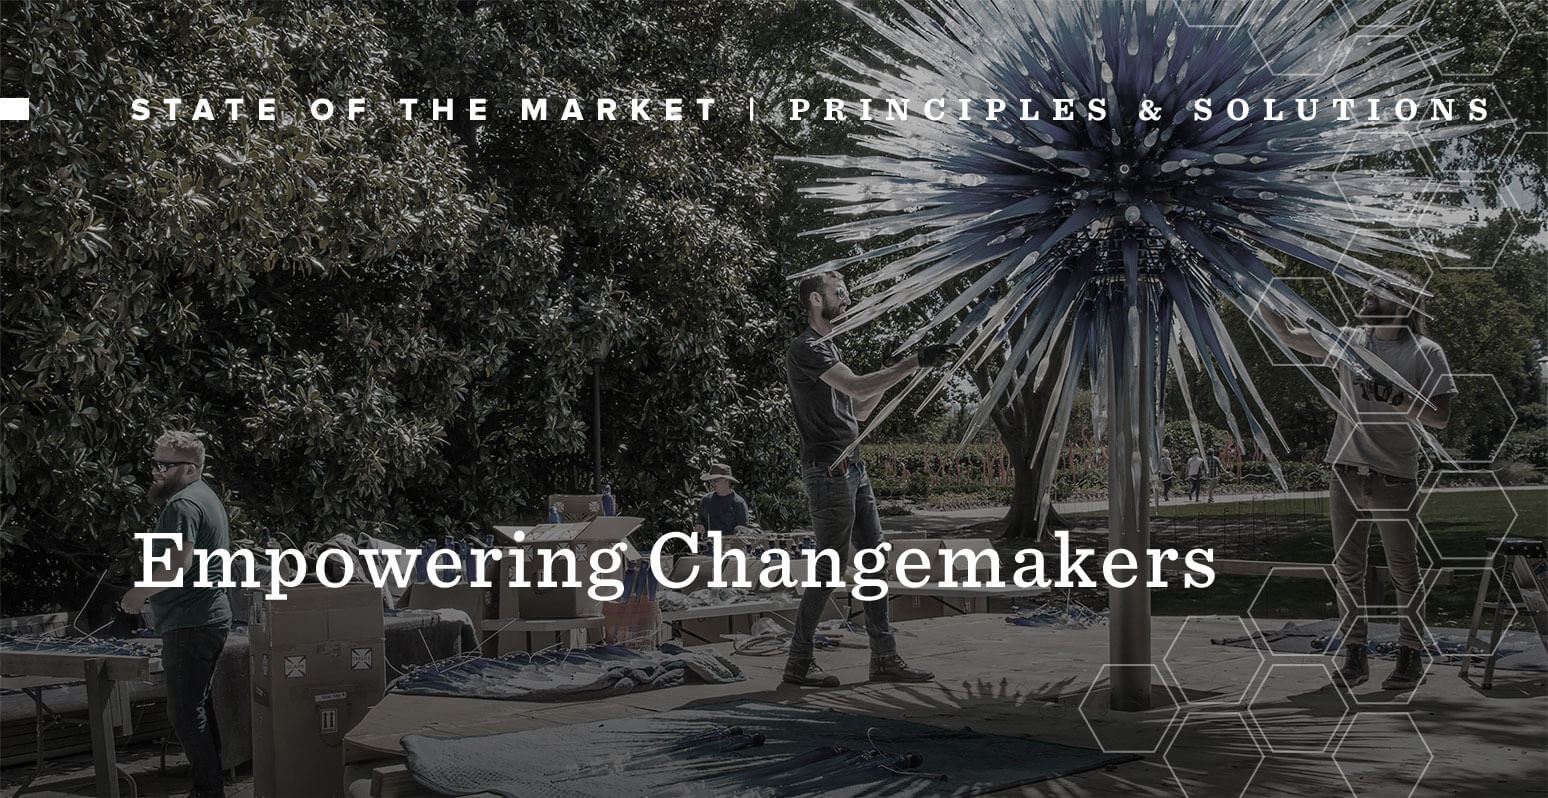 State of the Market: Pricipals & Solutions - Empowering Changemakers